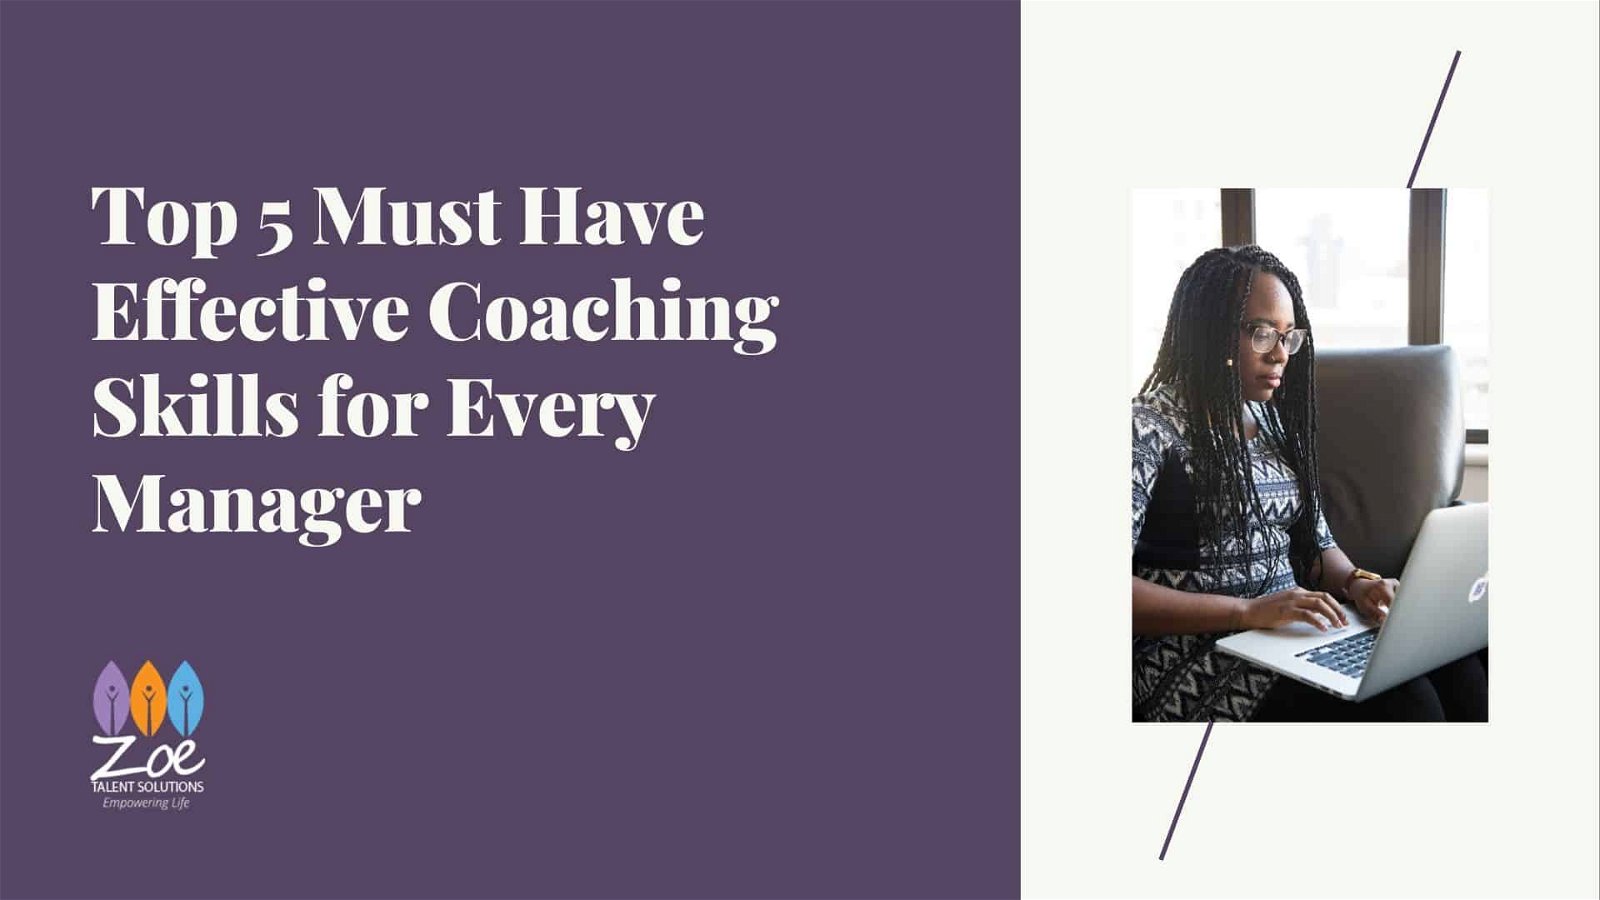 Top 5 Must Have Effective Coaching Skills for Every Manager